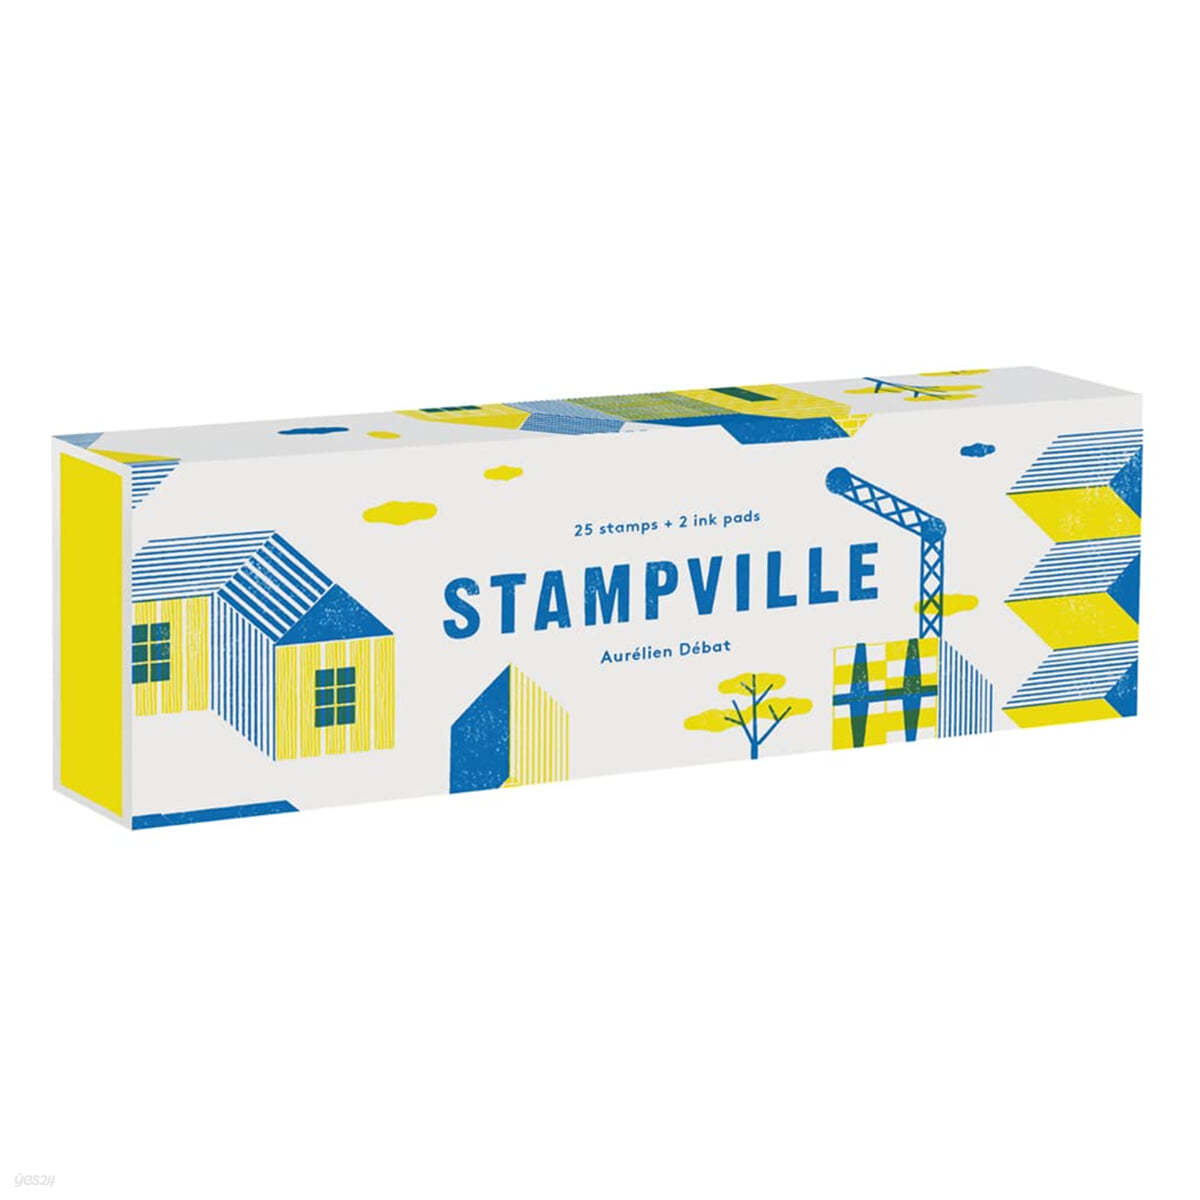 Stampville : 25 Stamps + 2 Ink Pads (스탬프 25개 + 잉크패드 2개 세트)